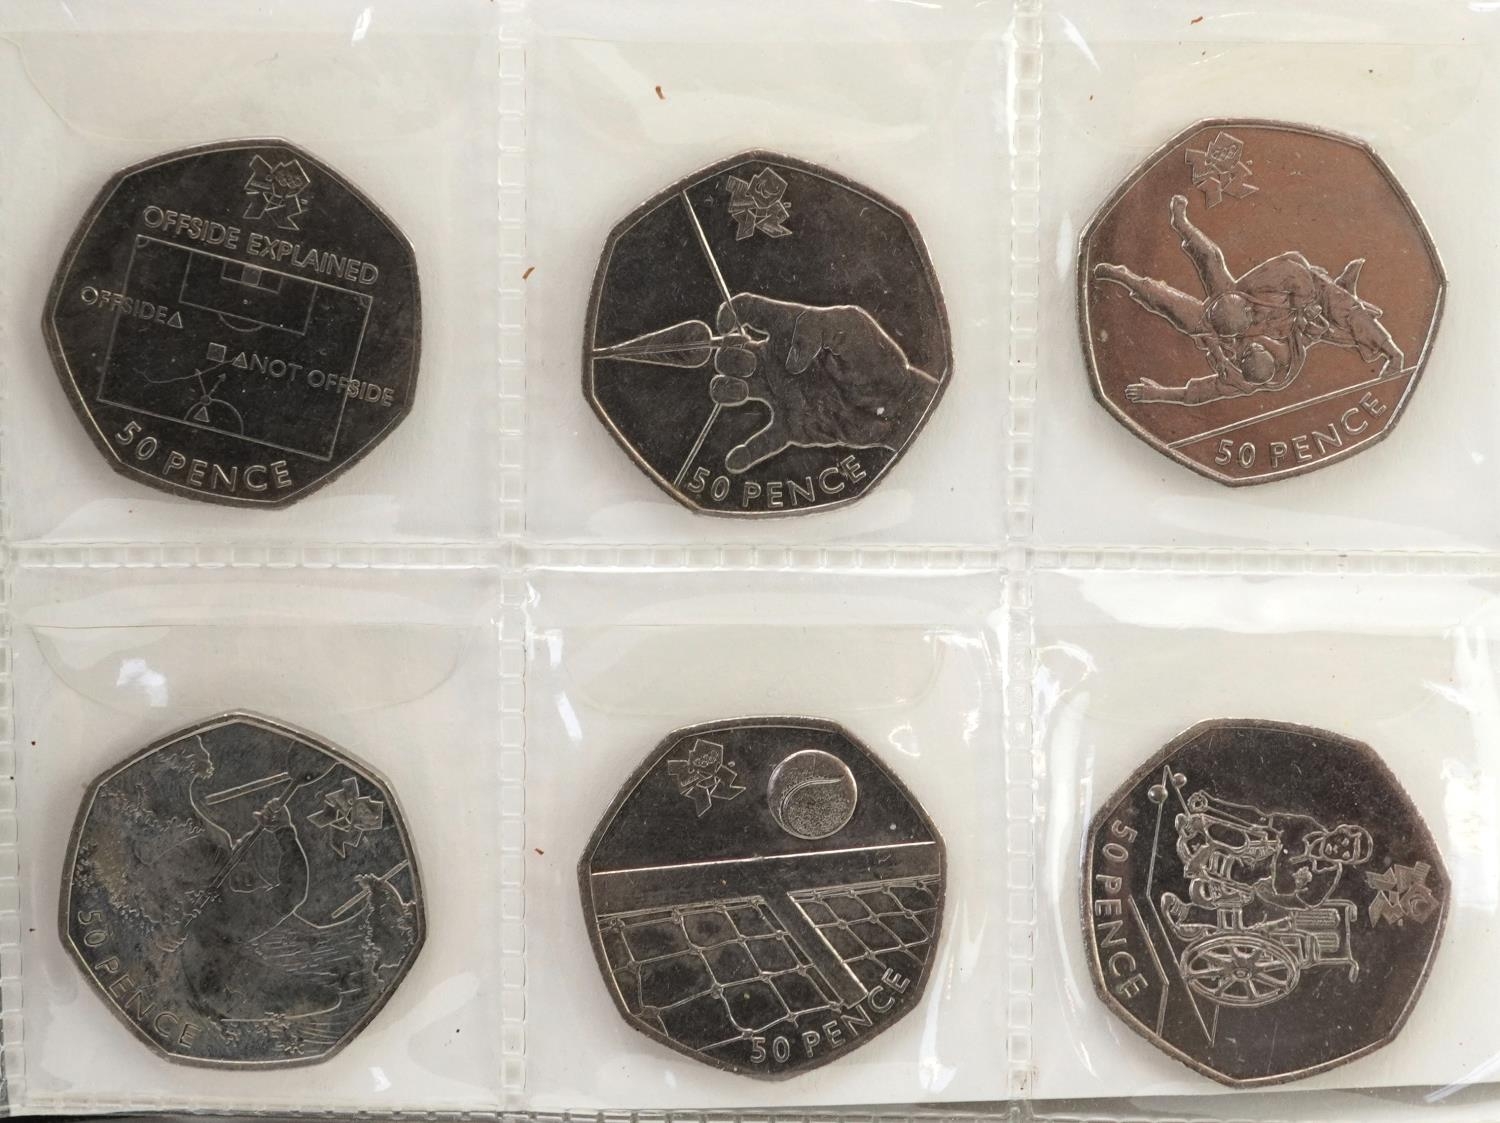 Set of thirty Elizabeth II 2011 London 2012 Olympics fifty pence pieces arranged in a coin - Image 3 of 6